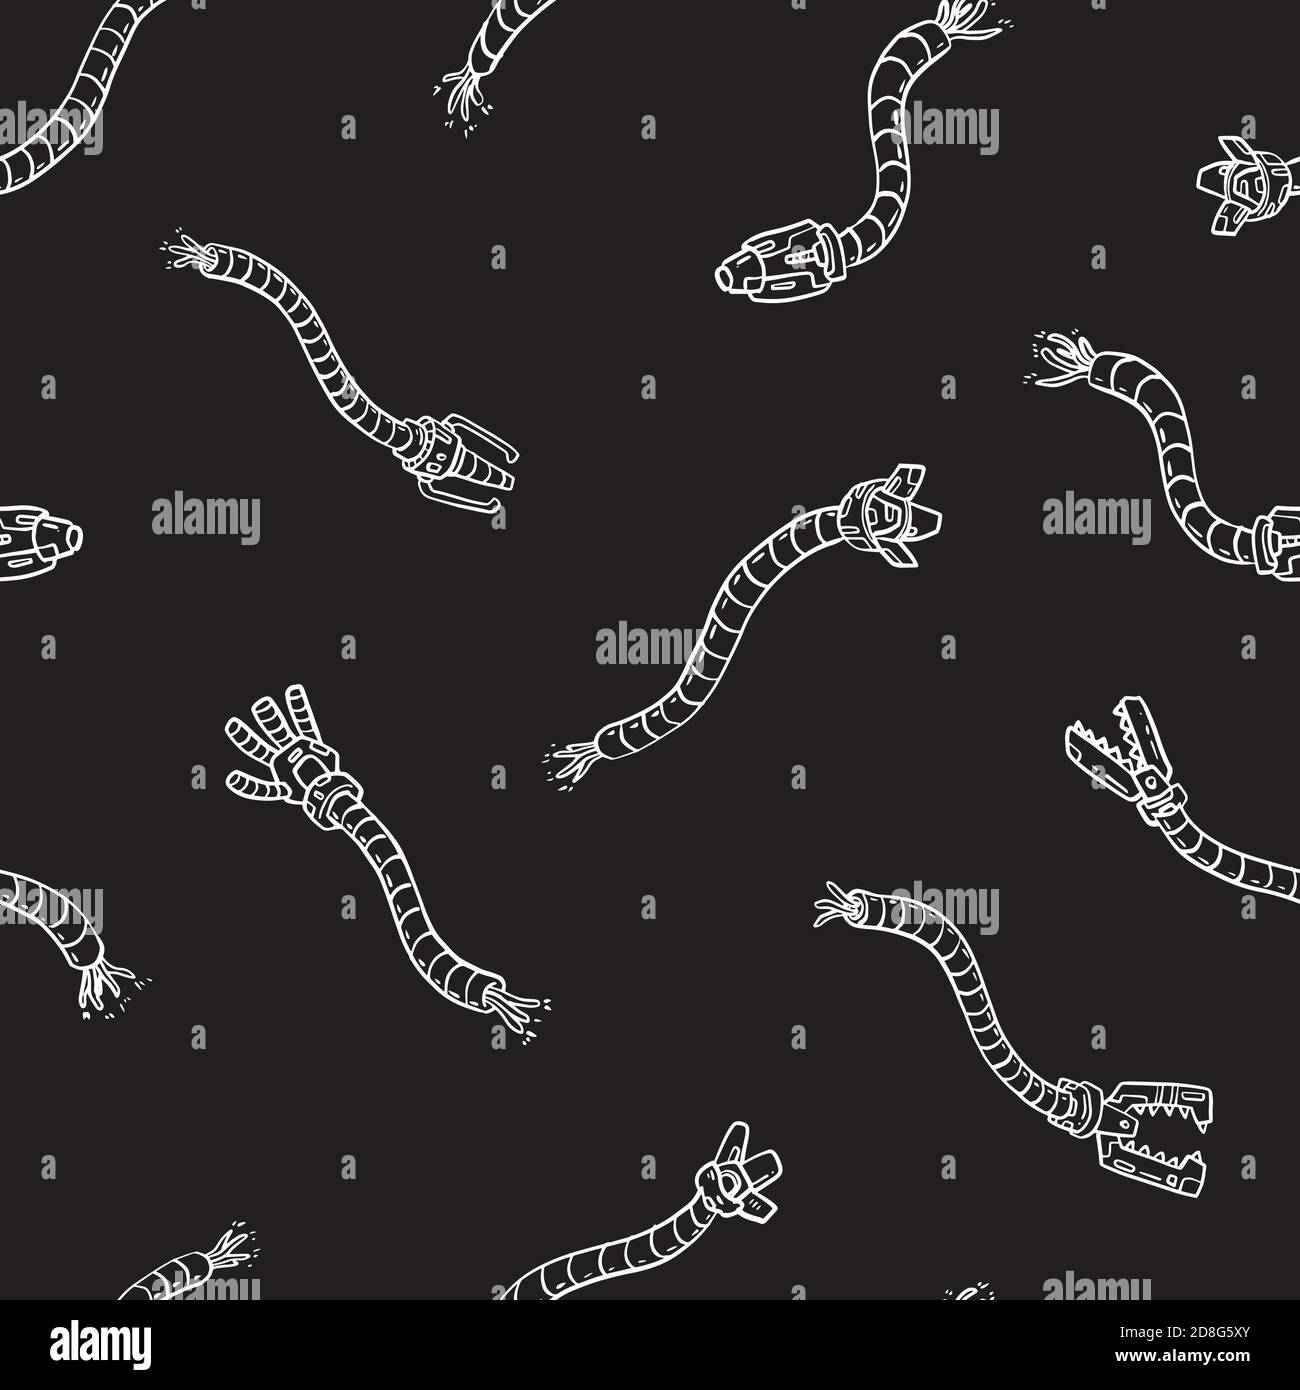 Robot hands doodle seamless pattern. Black and white background. Vector illustration for surface design, print, poster, icon, web, graphic designs. Stock Vector